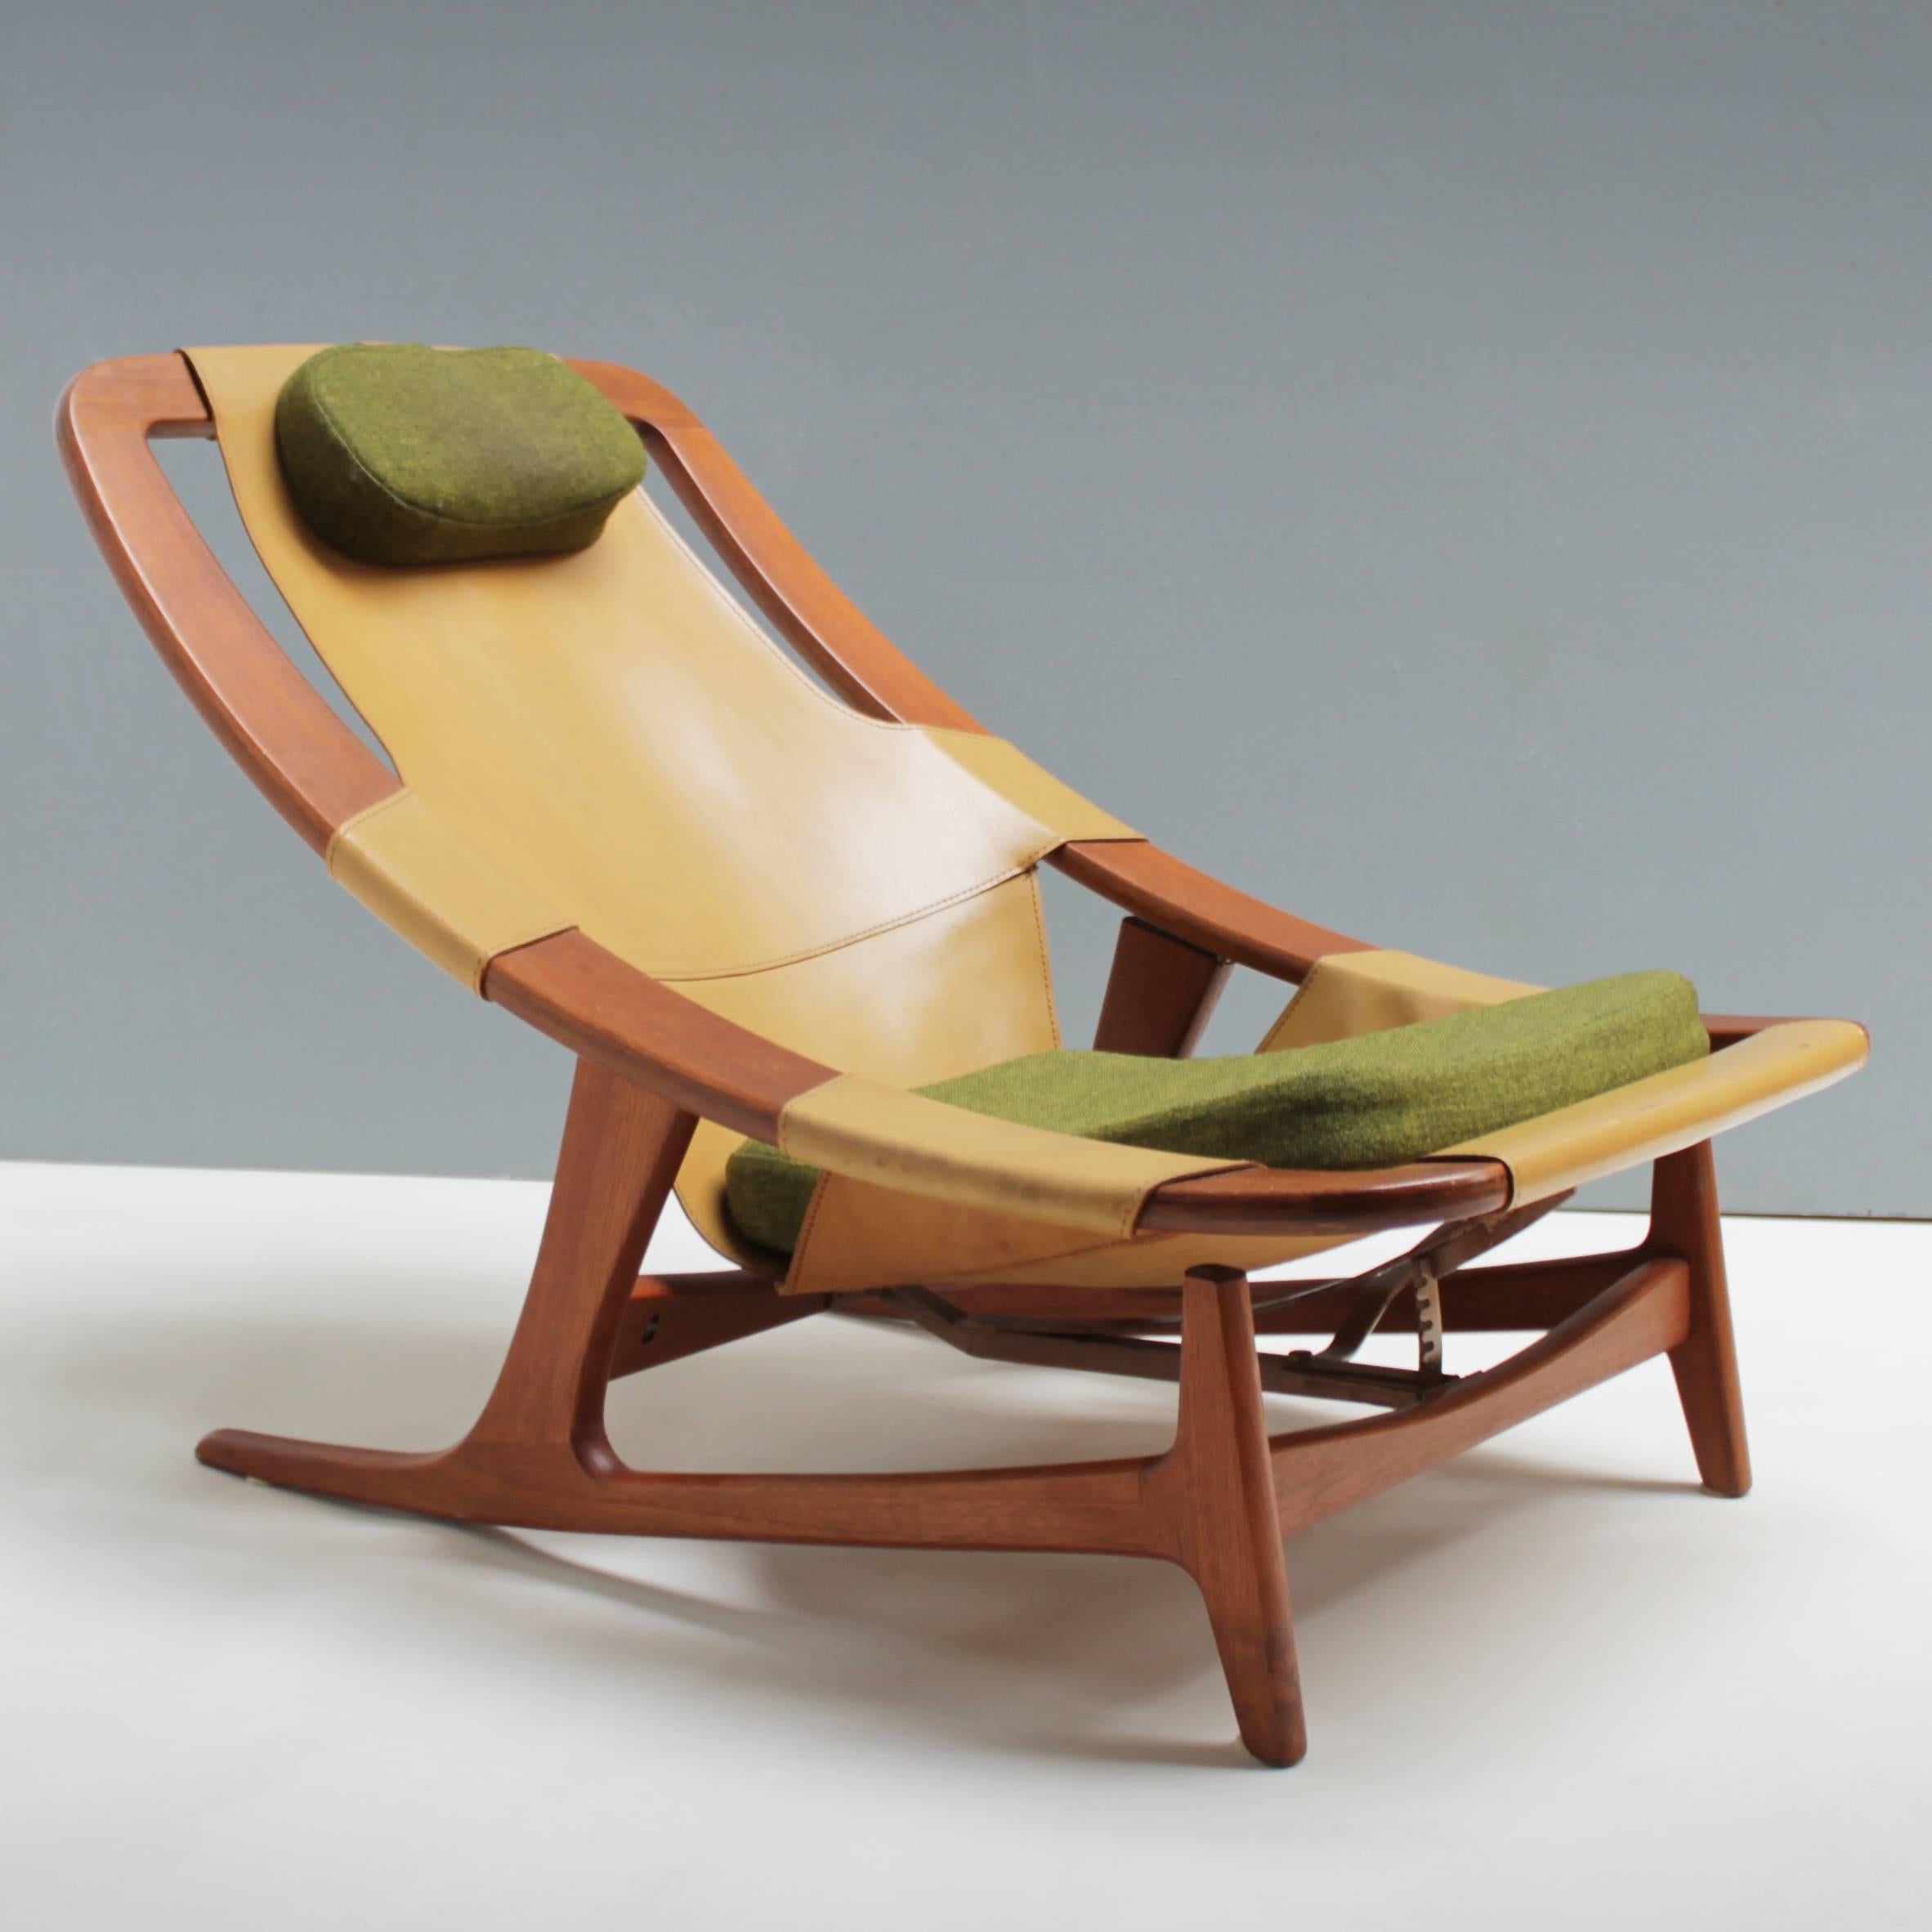 Lounge chair 'Holmenkollen' by Arne Tidemand Ruud. Manufactured by A/S Inventar, Gjövik for Norcraft. Teak, adjustable seat, beige cow leather and original green cushions. The leather marked: Norcraft NORWEGIAN DESIGN, MADE IN NORWAY.
Beautiful